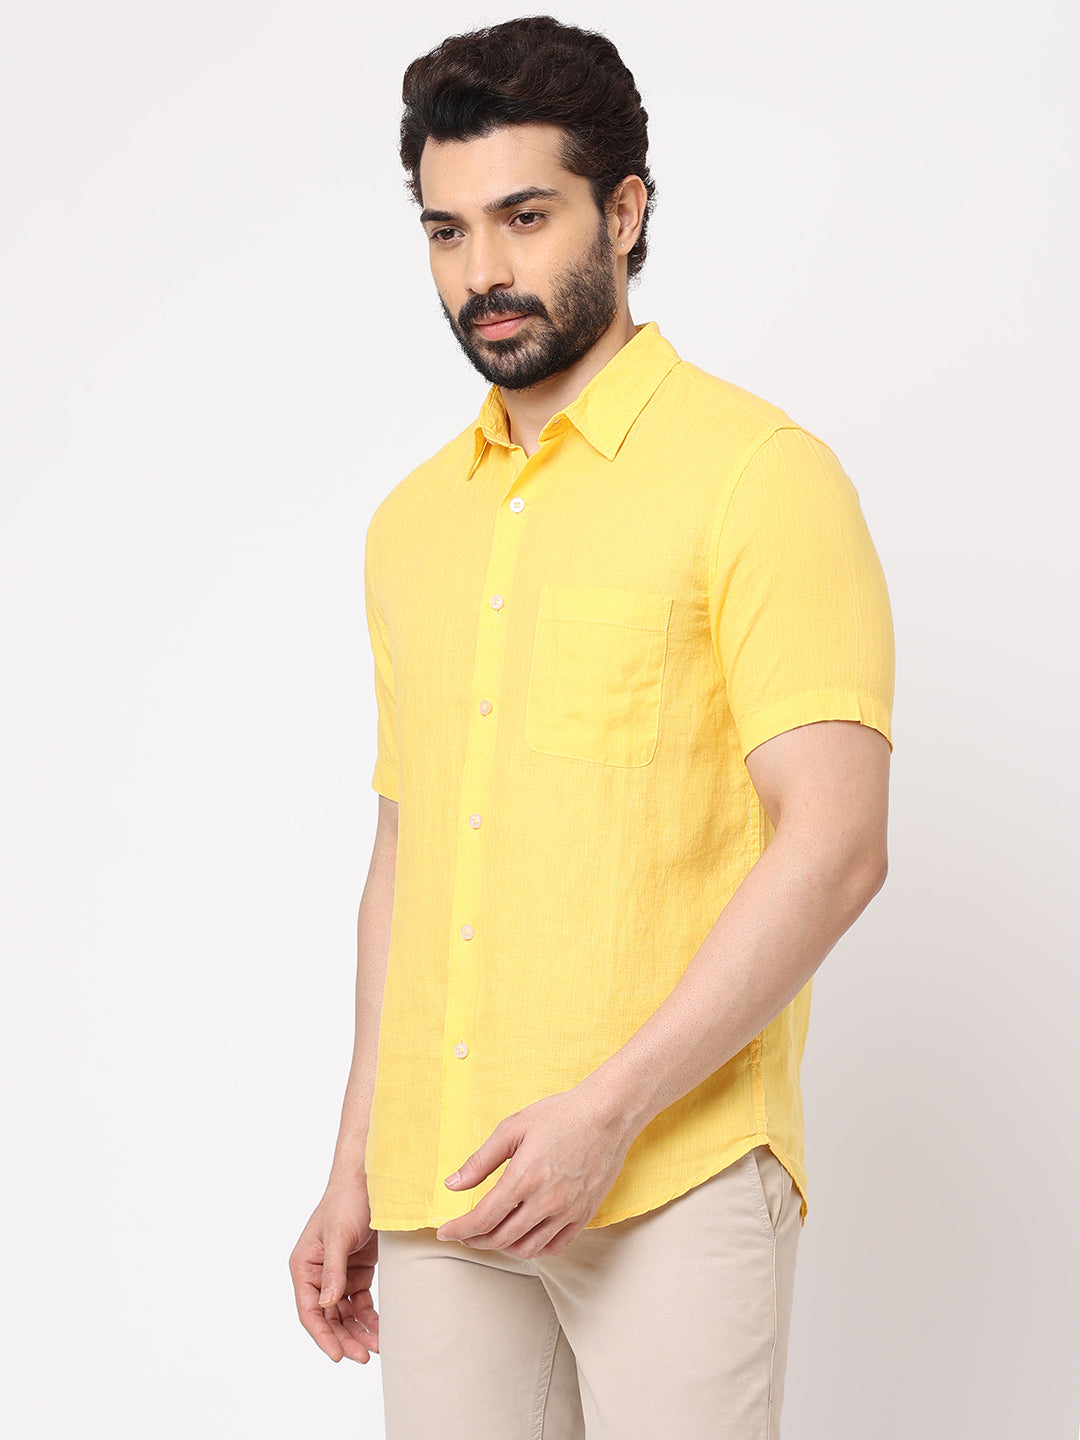 Shop from these 8 Best Linen Clothing Brands in India - Jd Collections